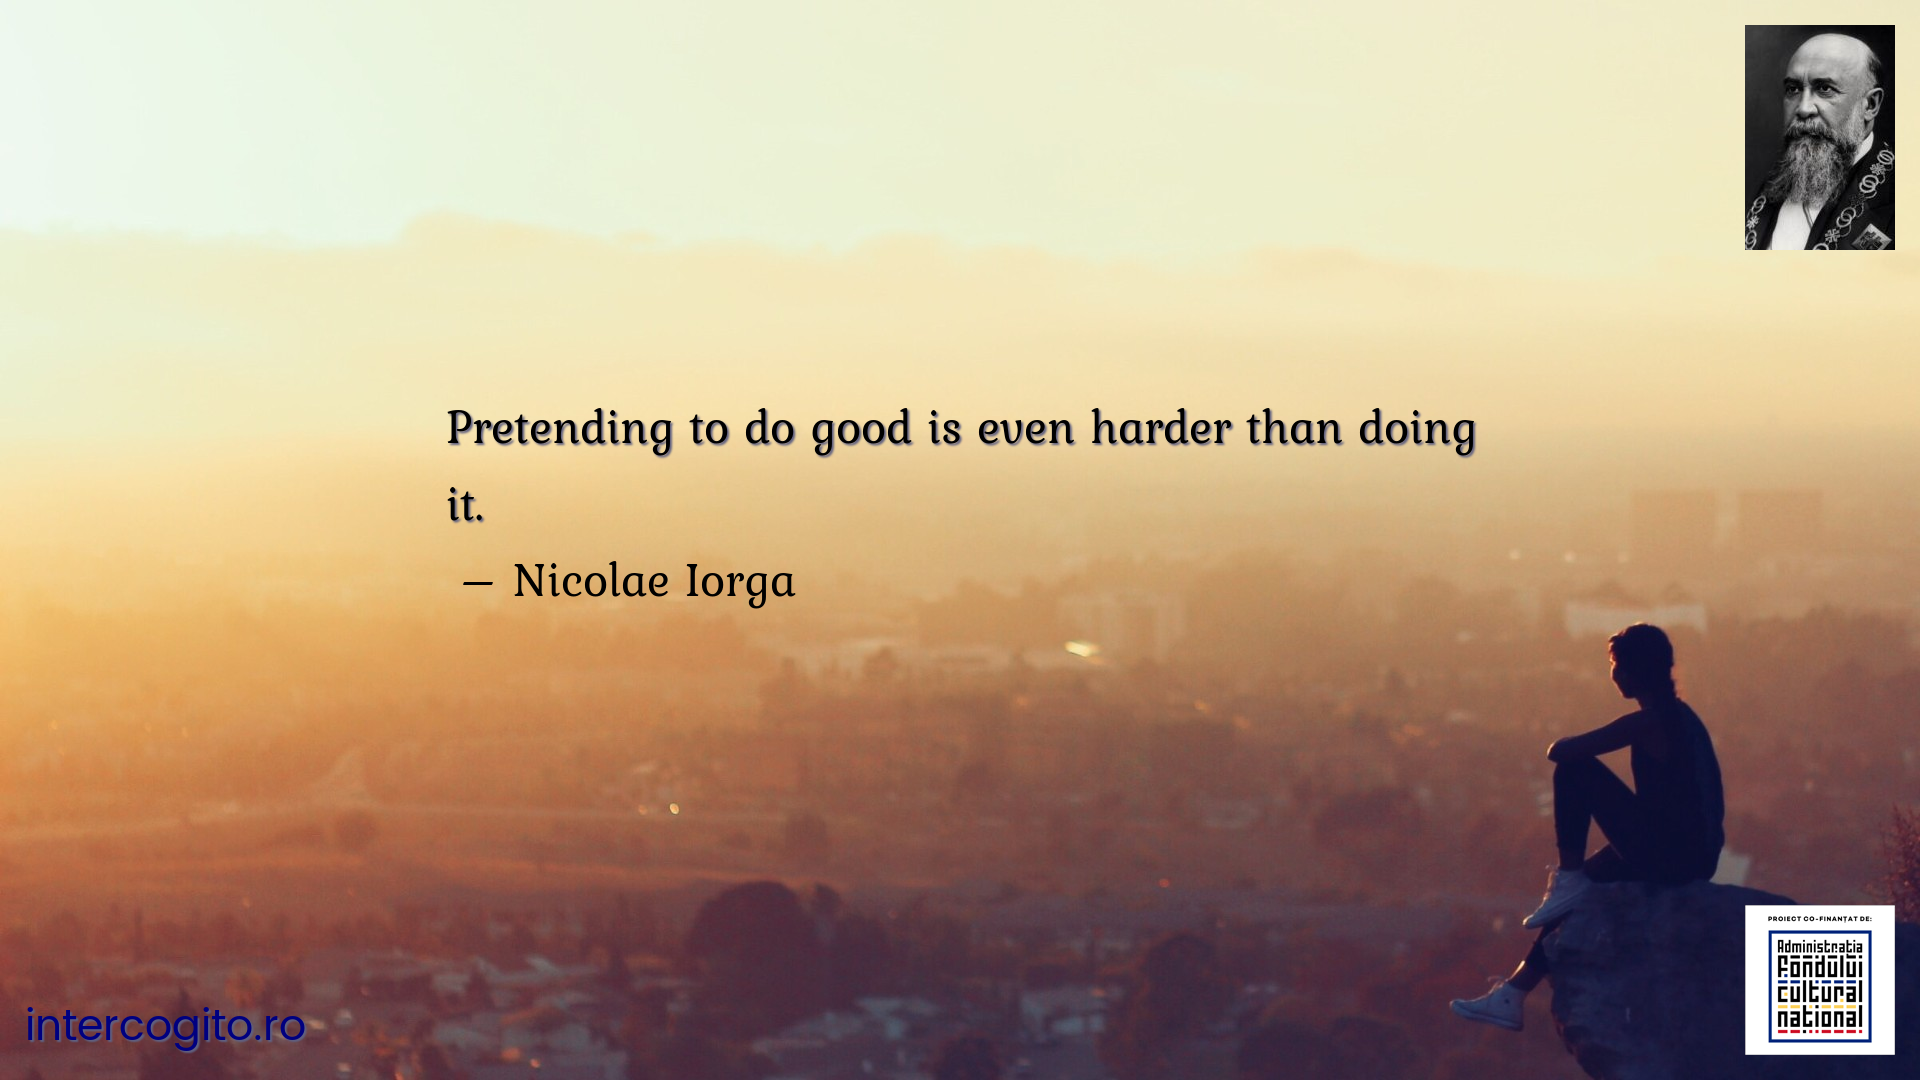 Pretending to do good is even harder than doing it.